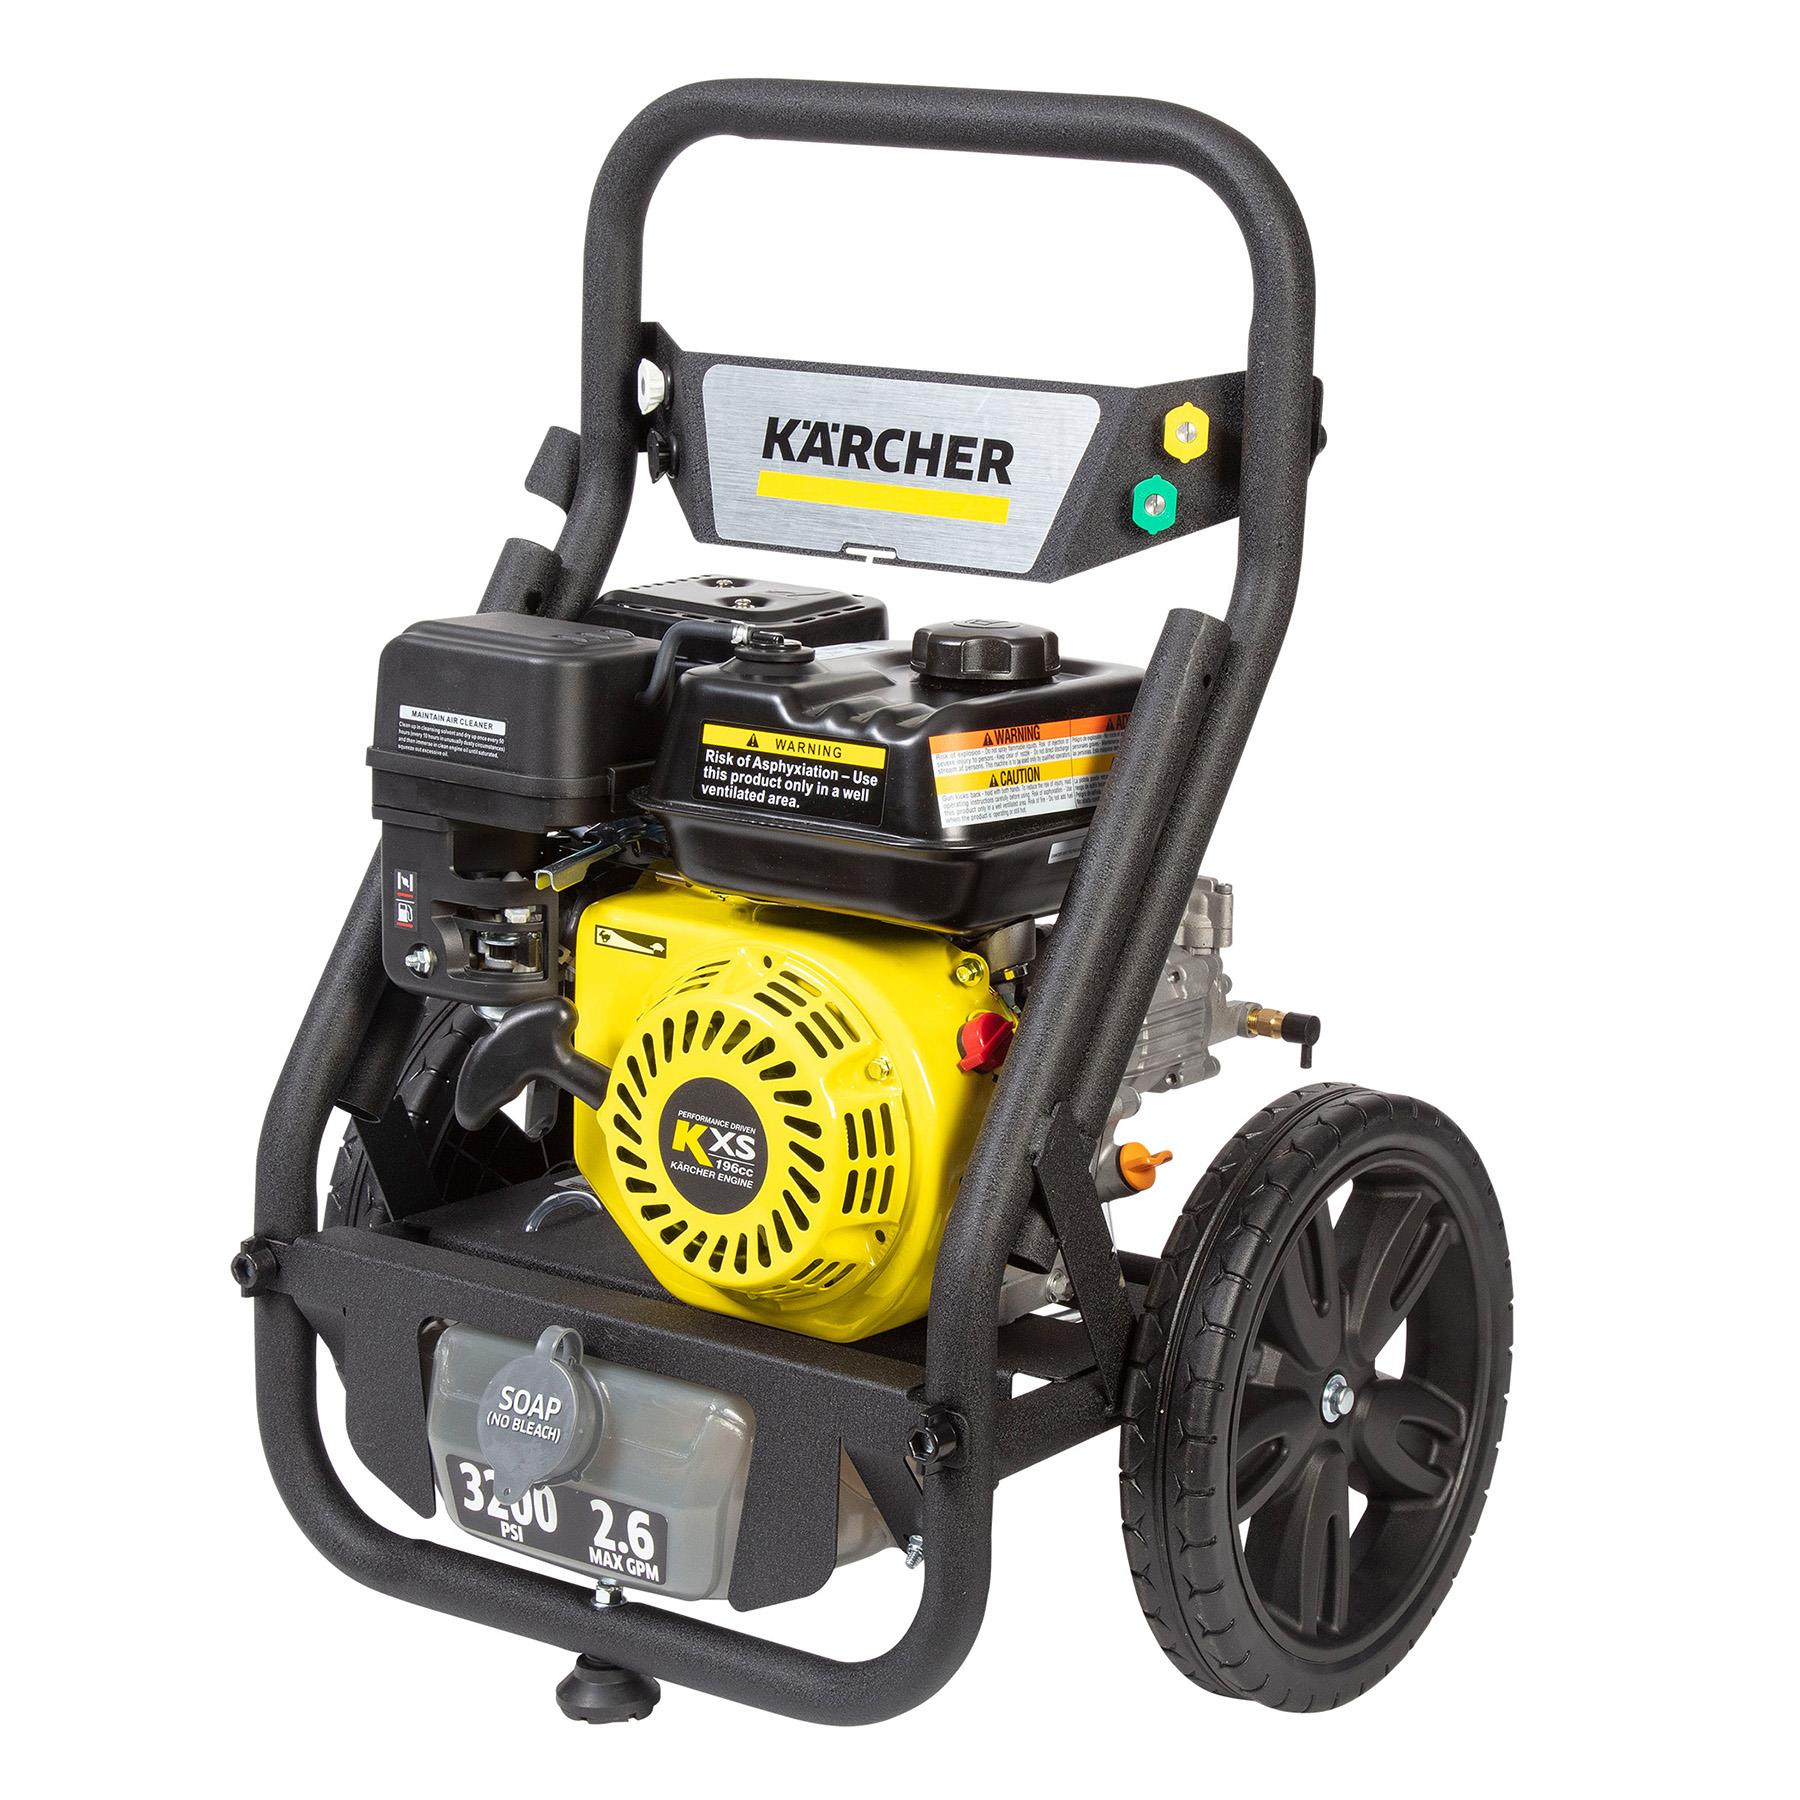 Karcher Professional 3200 PSI (Electric - Cold Water) Pressure Washer (440V  3-Phase)